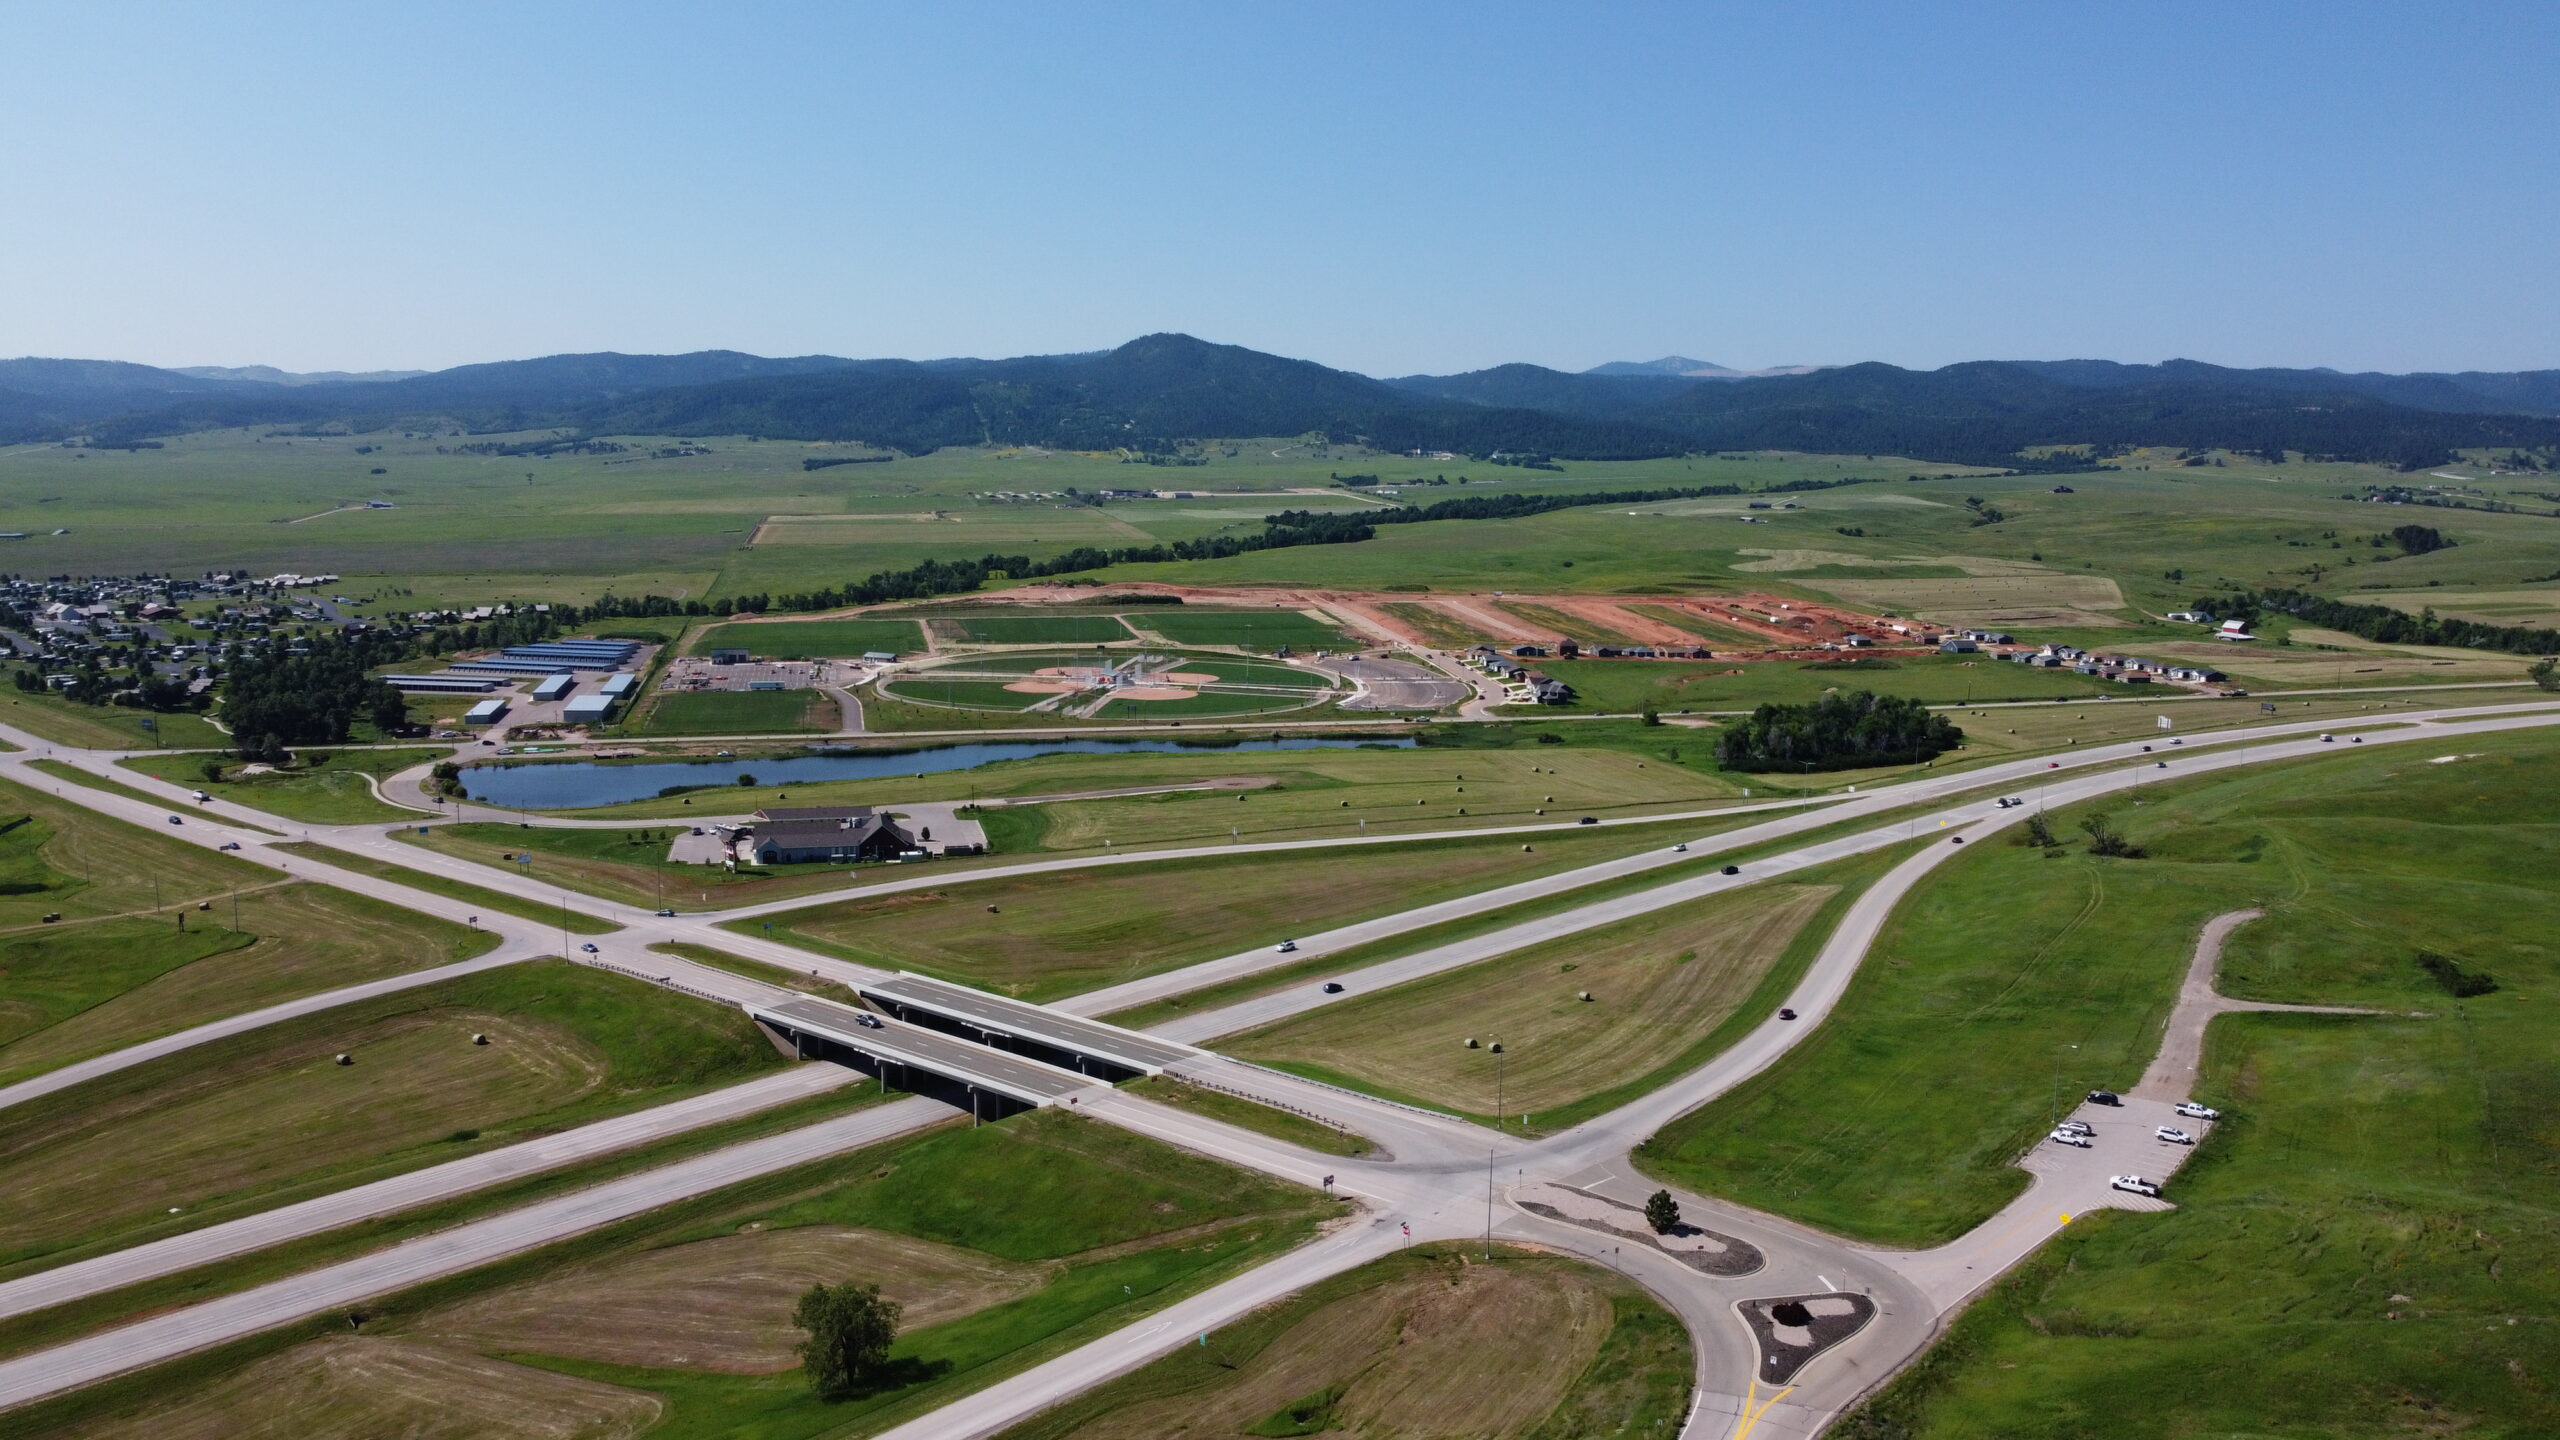 Sky Ridge in Spearfish is a new home development featuring workforce housing